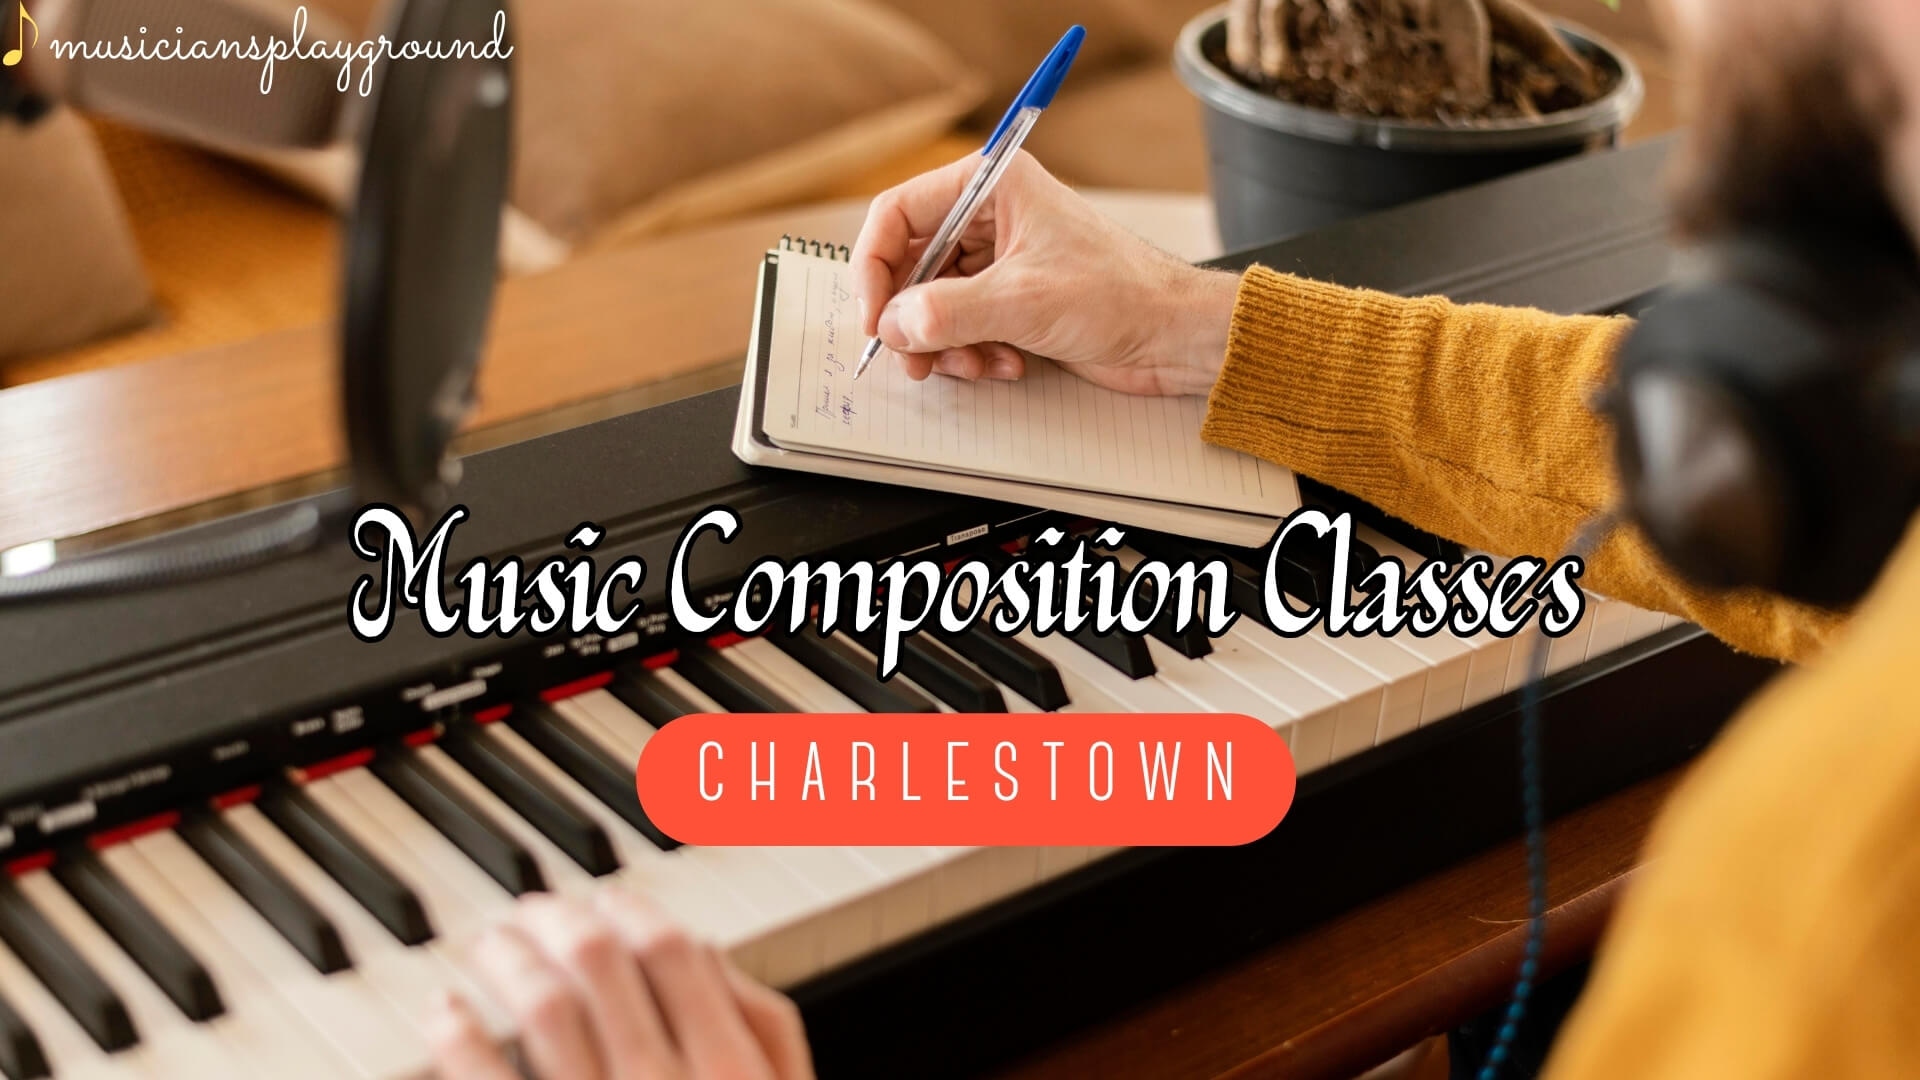 Music Composition Classes in Charlestown, Massachusetts: Unlock Your Musical Potential at Musicians Playground